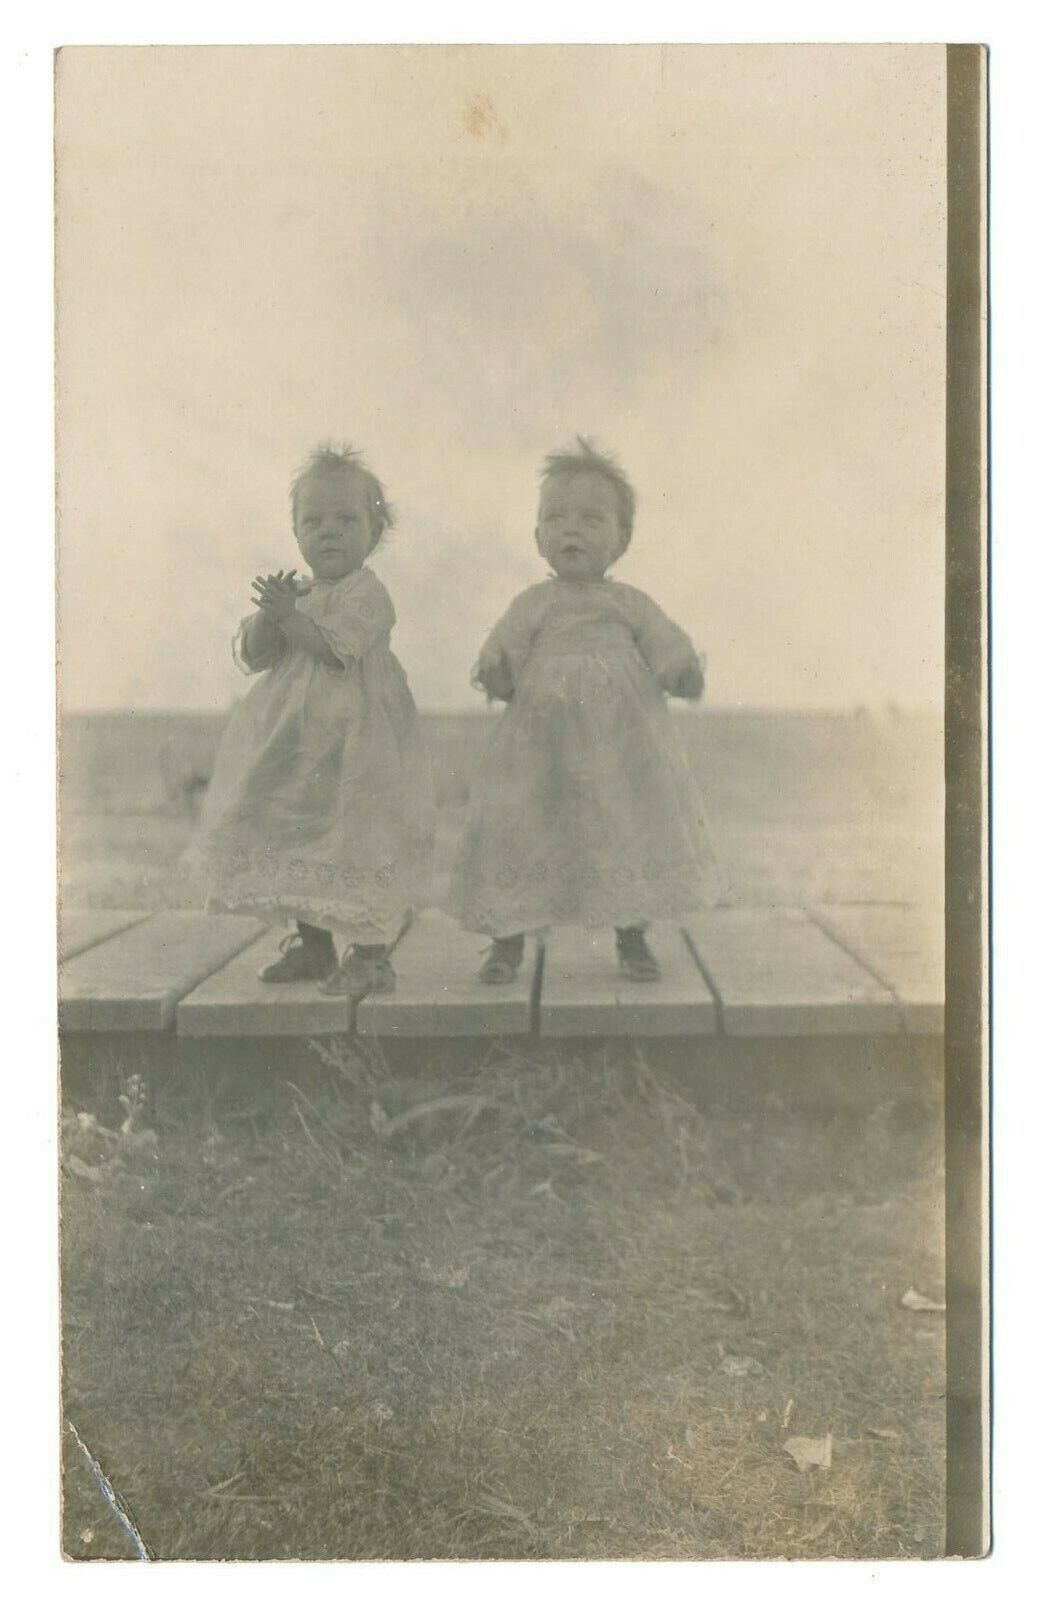 Toddler Twin With Birth Defect Arms Not Fully Formed Prairie Photo Postcard RPPC